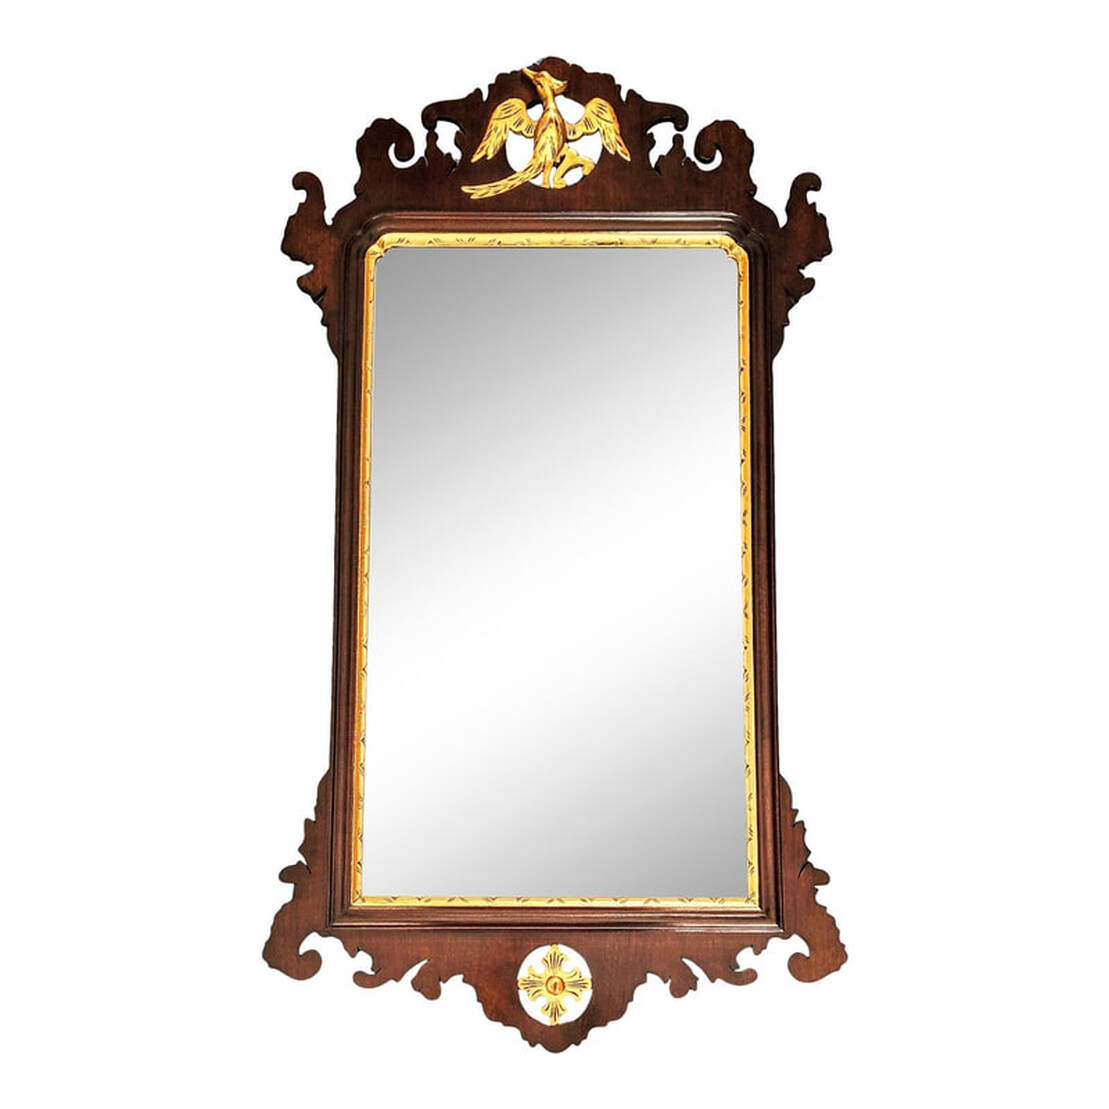 Vintage Wallace Nutting mirror surrounded by mahogany wood sawed open fretwork and decorated with carved gilt decorations.  Rectangular beveled looking glass in a parcel gilt carved mahogany frame.  At top is a carved and gilded bird, a crane with a crest feather resting on a branch.  At bottom is a carved and gilded foliated quatrefoil.  The back is covered with a fruit wood panel and is marked multiple times with the Wallace Nutting block letter iron brand signature which was in use from 1925 through the 1930s.